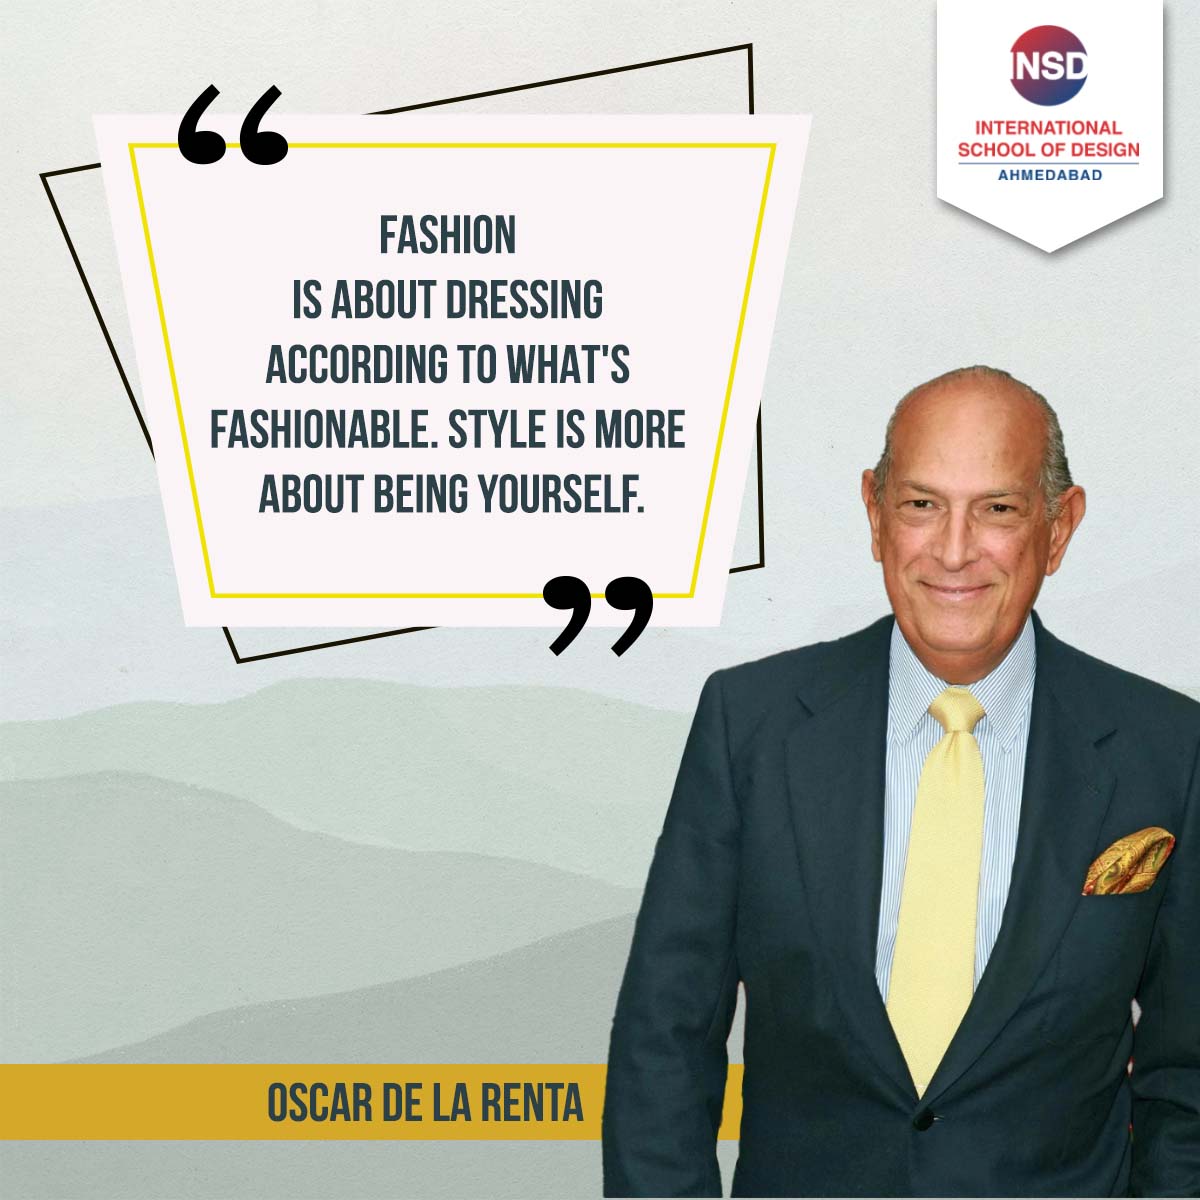 So Be Yourself!
.
.
.
.
.
.
Wants to do something in the fashion World!

Give us a call on 77779 68115

or visit

insdahmedabad.com

#fashiondesigner #fashionstyling #fashiondesigncourse #fashionschool #quotes #quoteoftheday #fashiondesign #fashion